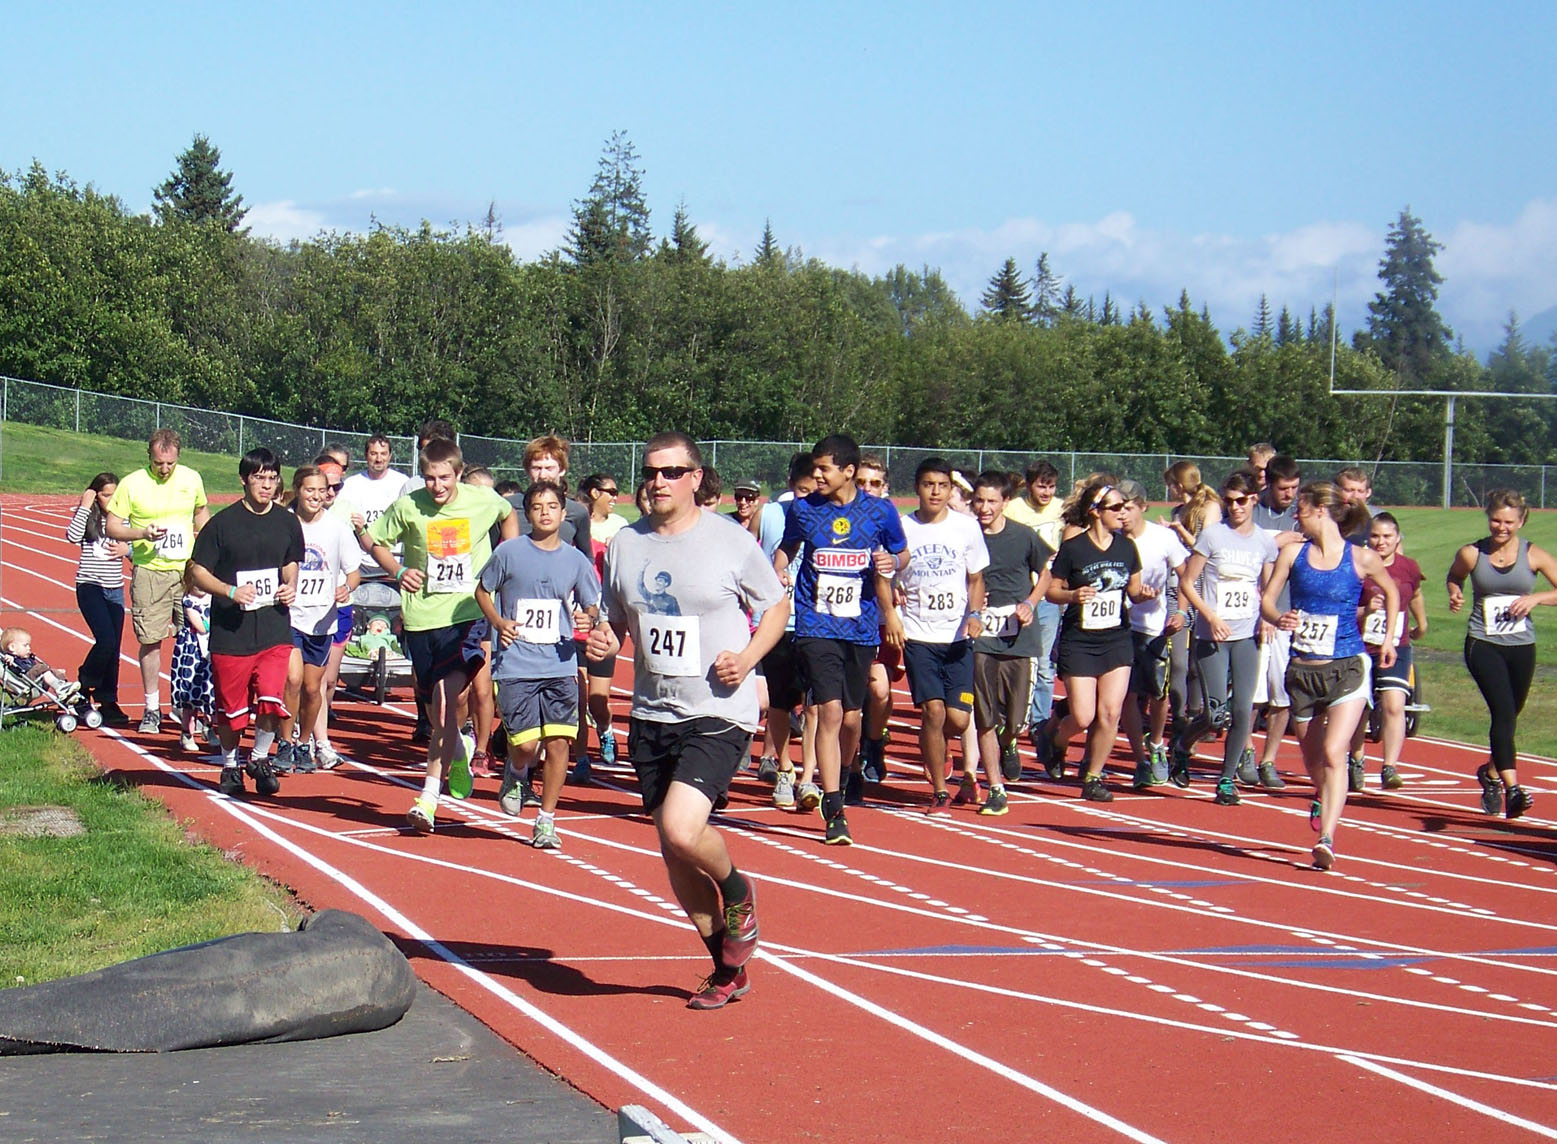 Friday’s K-Bay 5K was a fundraiser for the Children’s Tumor Foundation’s research of neurofibromatosis, a genetic disorder. -Photos by McKibben Jackinsky, Homer News